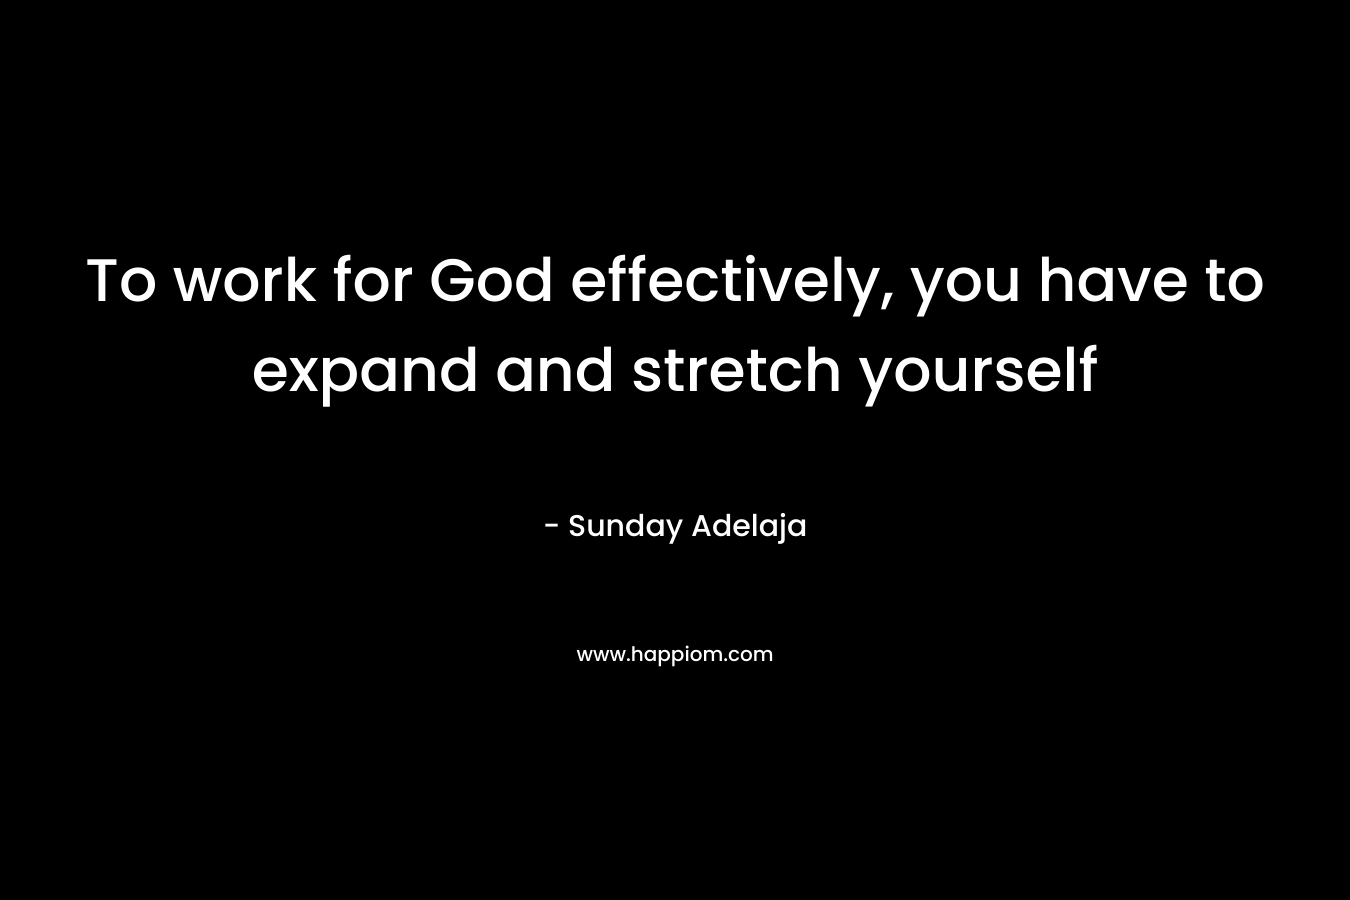 To work for God effectively, you have to expand and stretch yourself